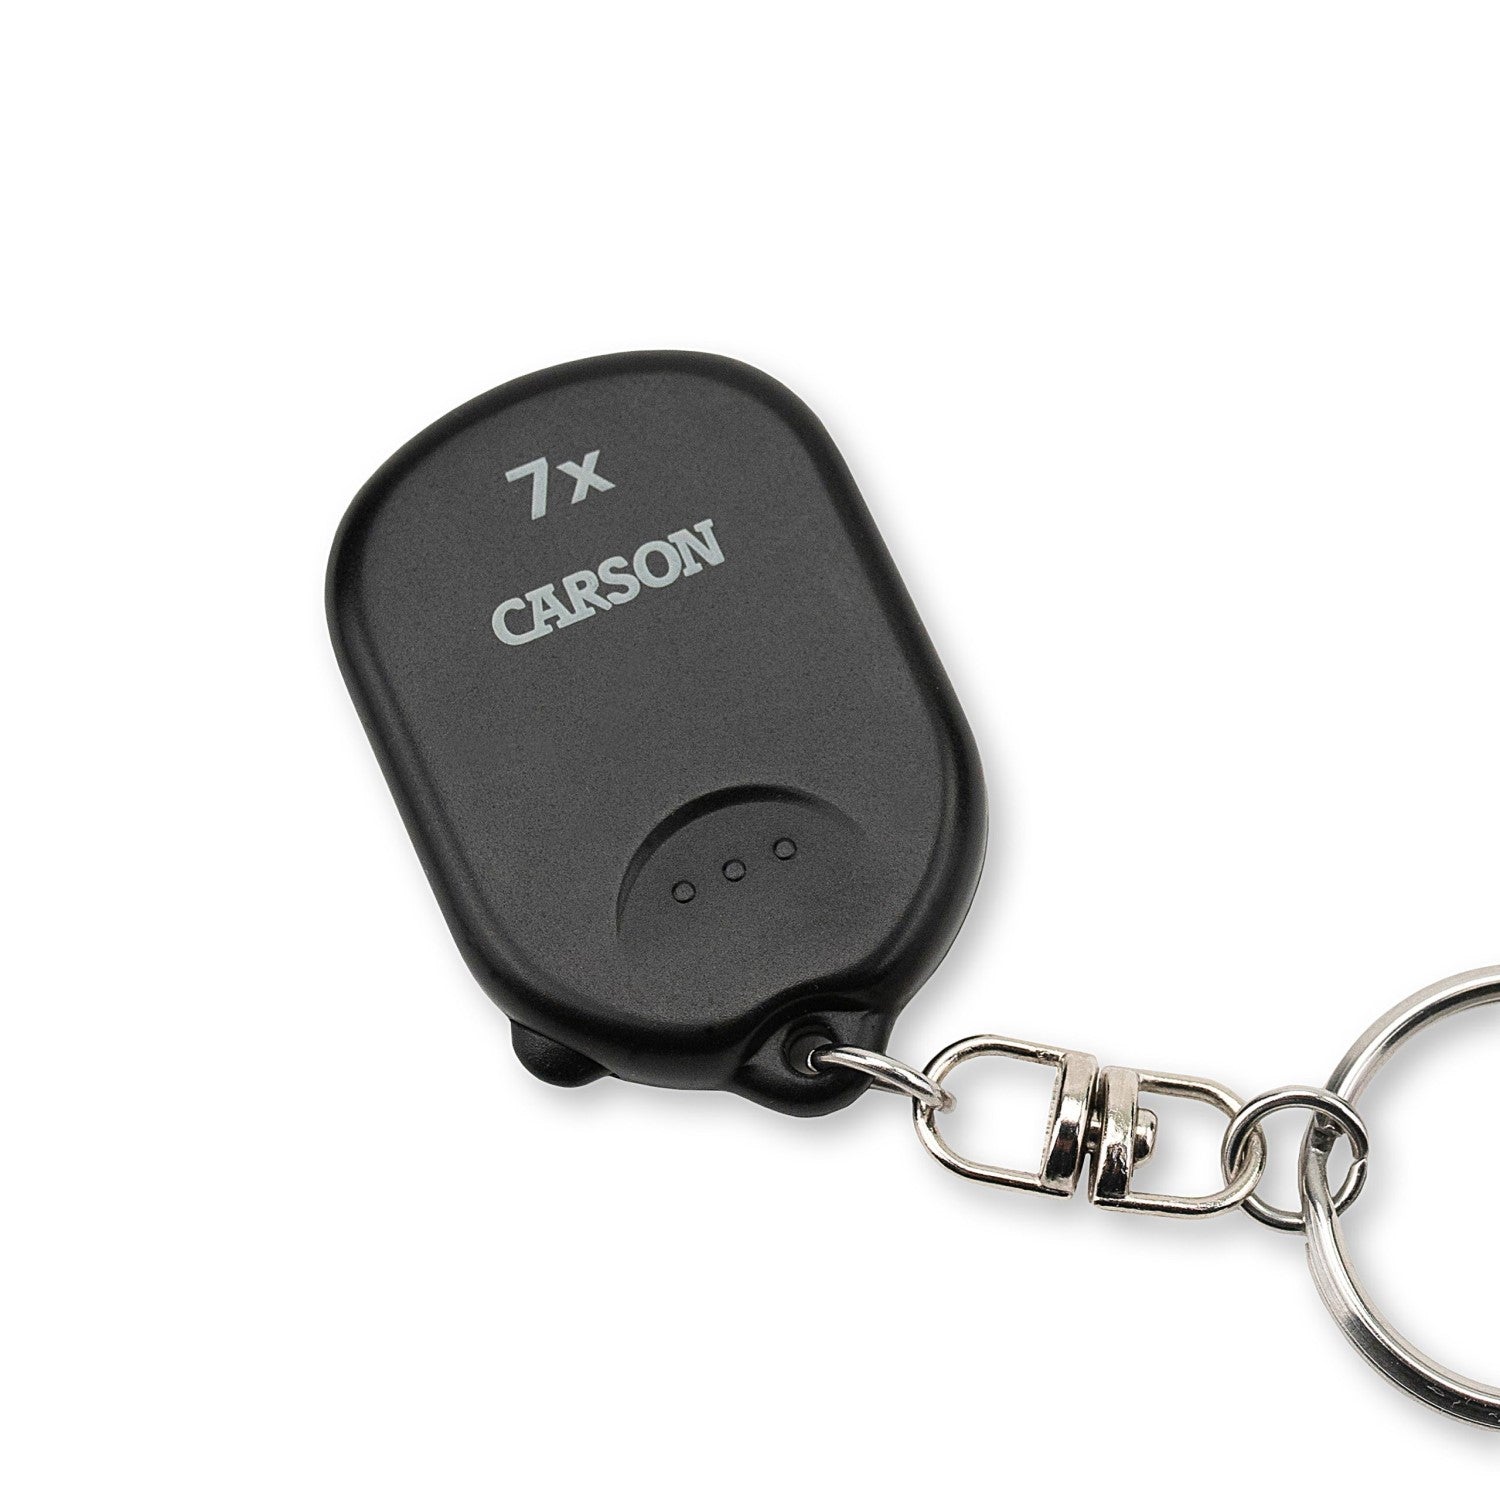 Image of the Pop-Up Keychain in its compact use when not using the magnifier.